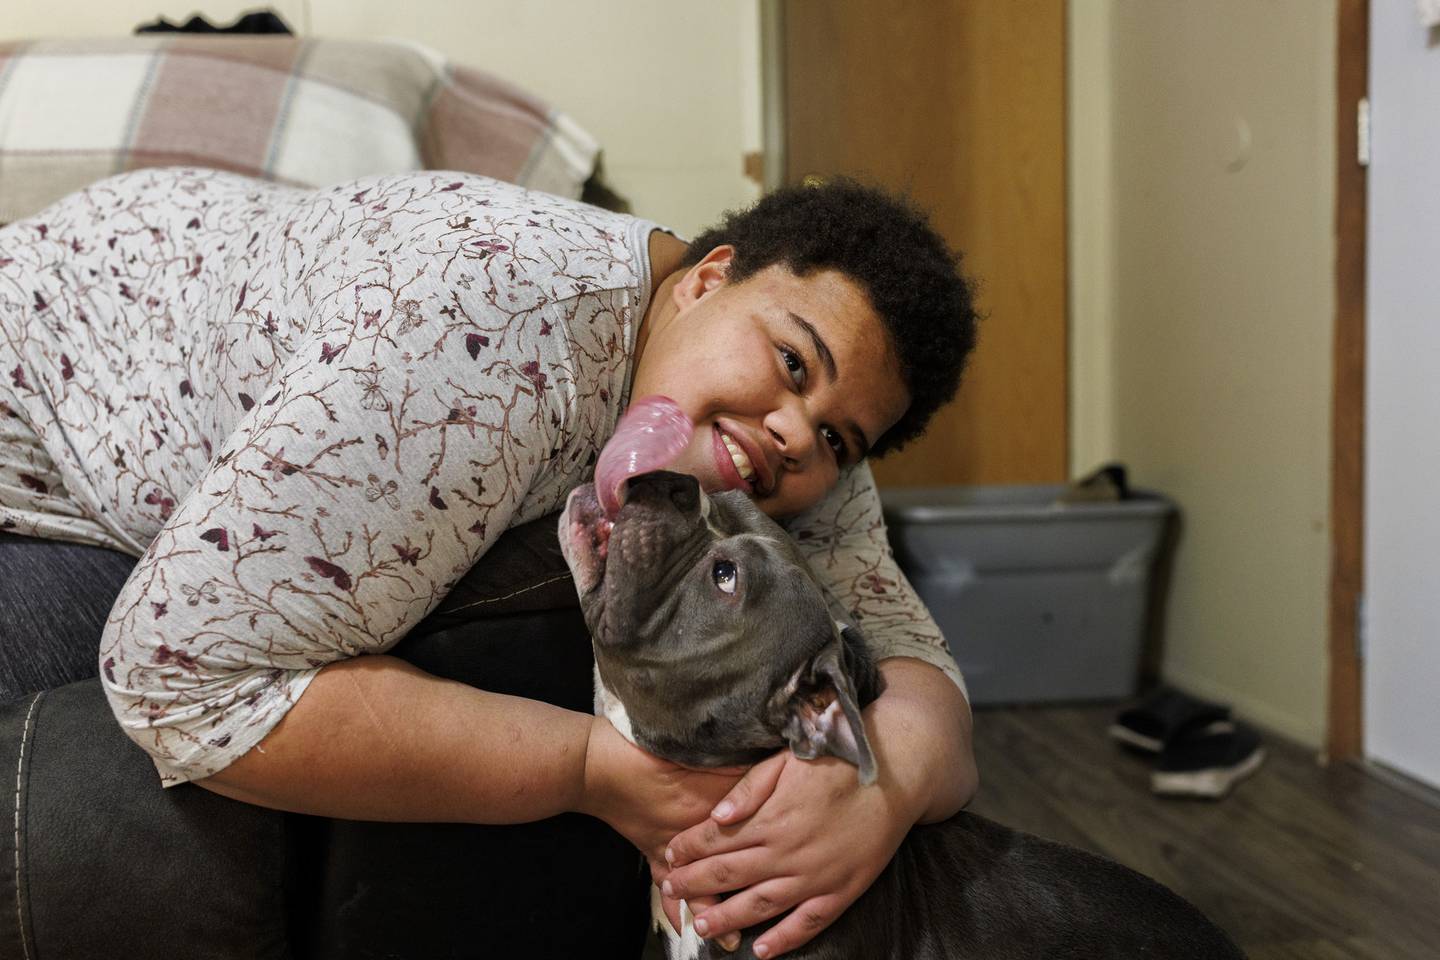 Destiny, 19, who graduated from Garrison in 2021, plays with her family’s dog inside their home. 